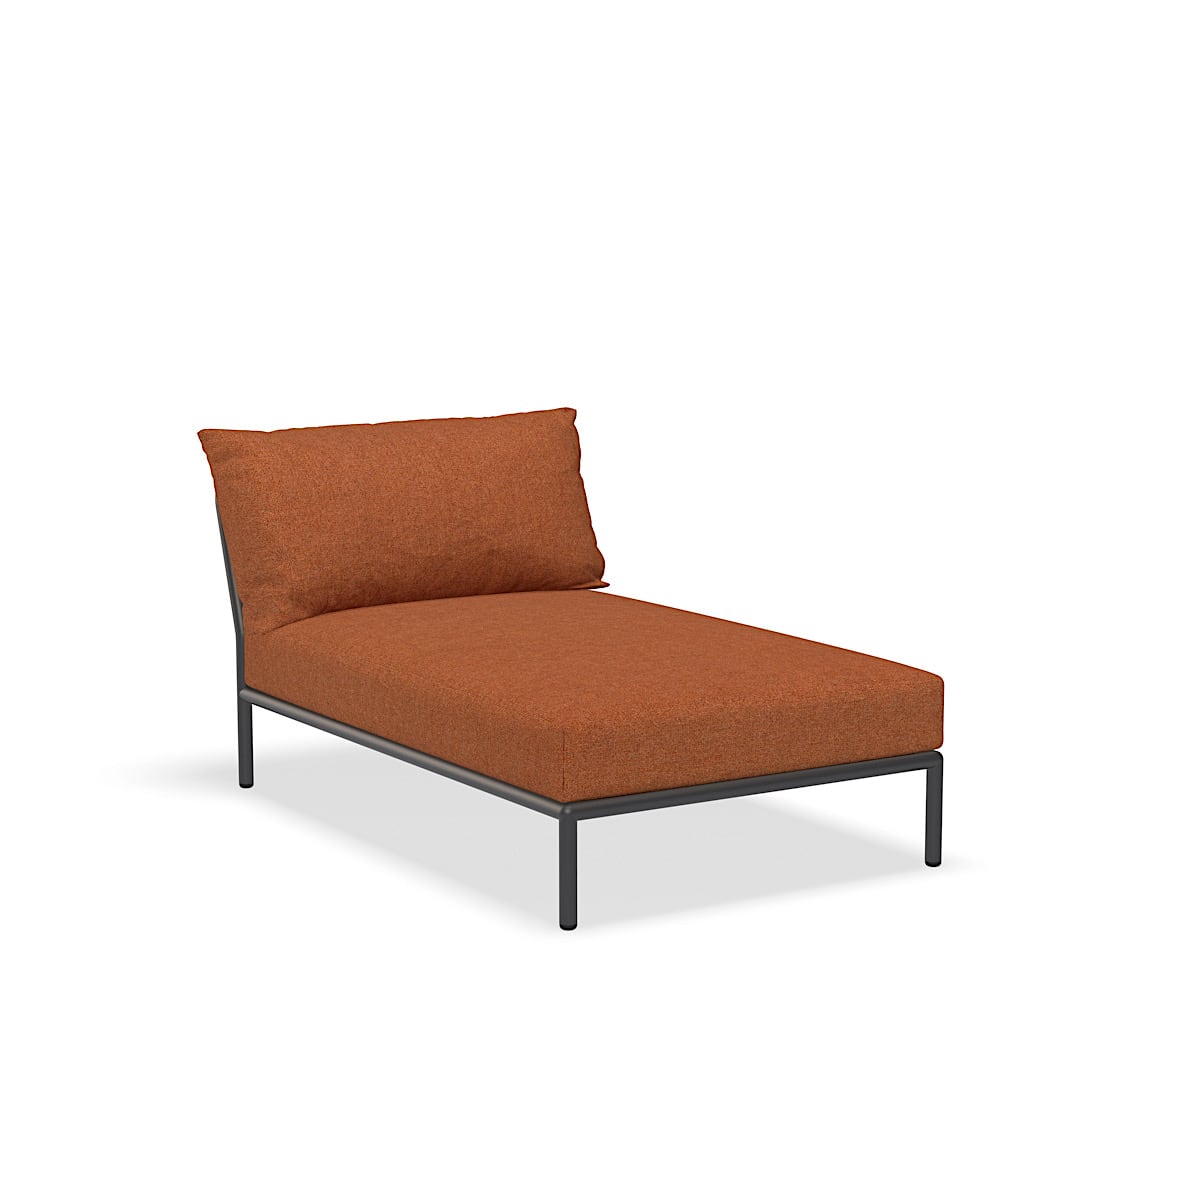 Chaise lounge  - 22209-1751 - Chaise longue, Rouille (HERITAGE), structure...